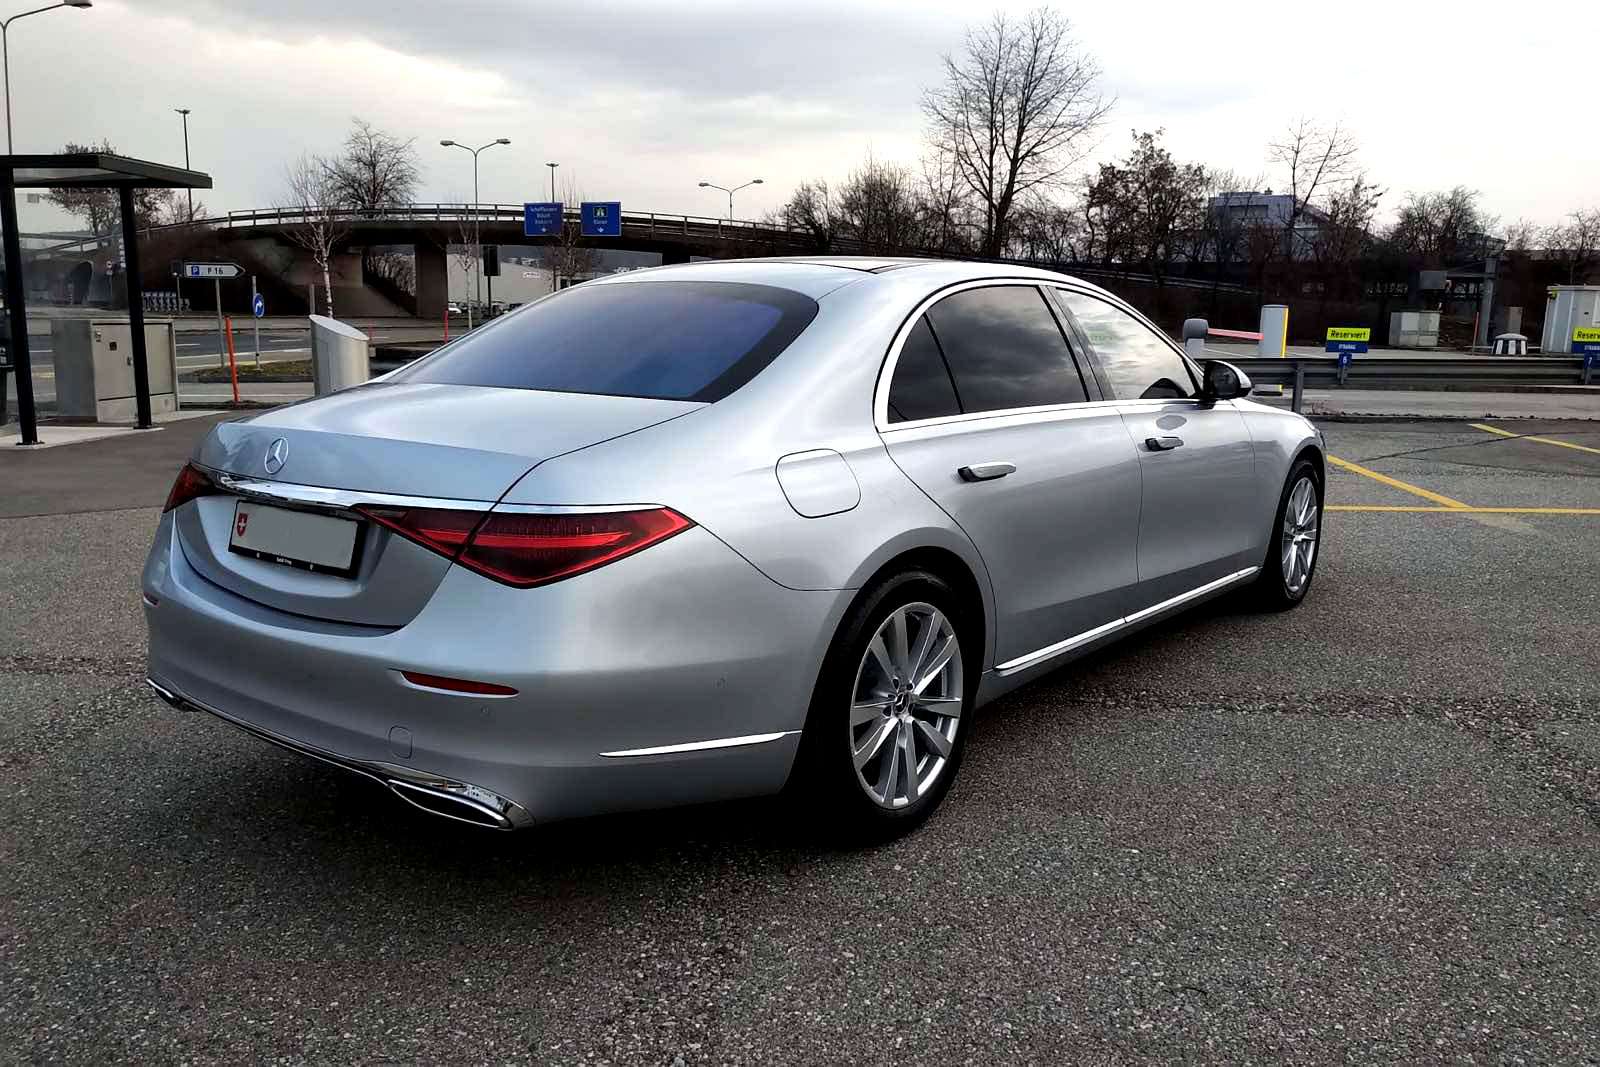 MERCEDES-AMG S-Class W223 350D Lang 4-Matic silver (for 3 passengers)